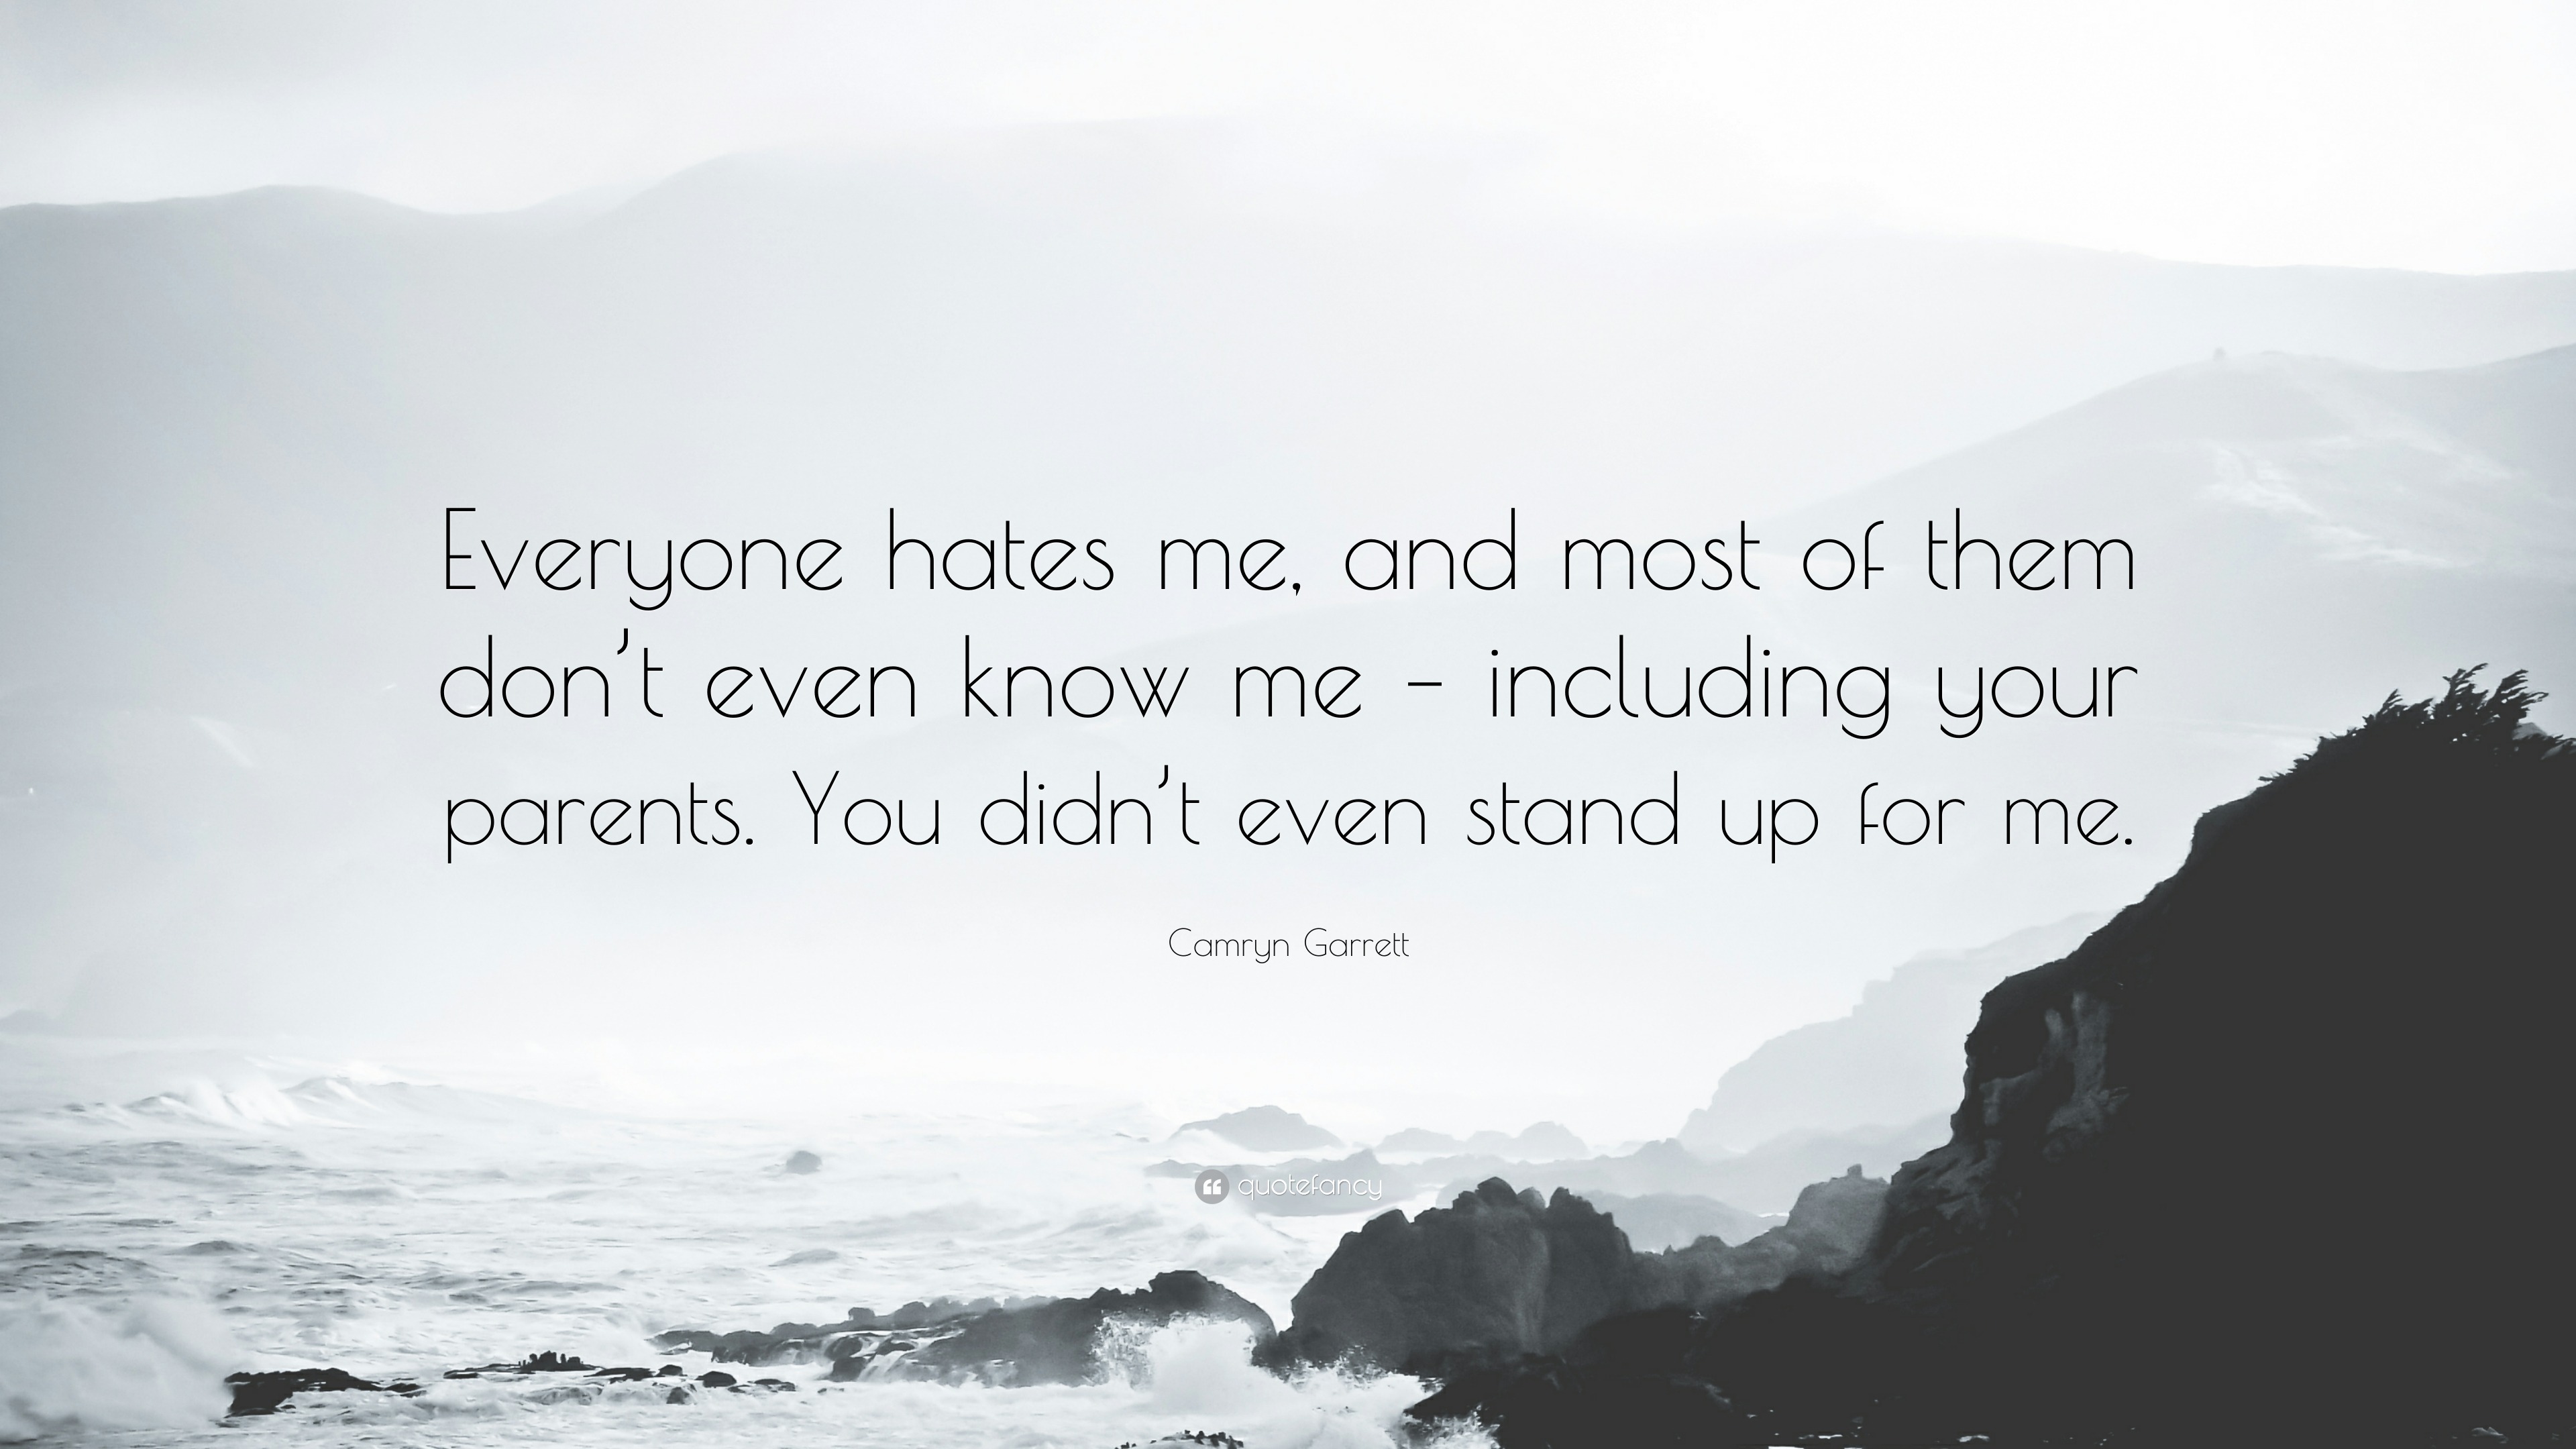 Camryn Garrett Quote: “Everyone hates me, and most of them don’t even ...